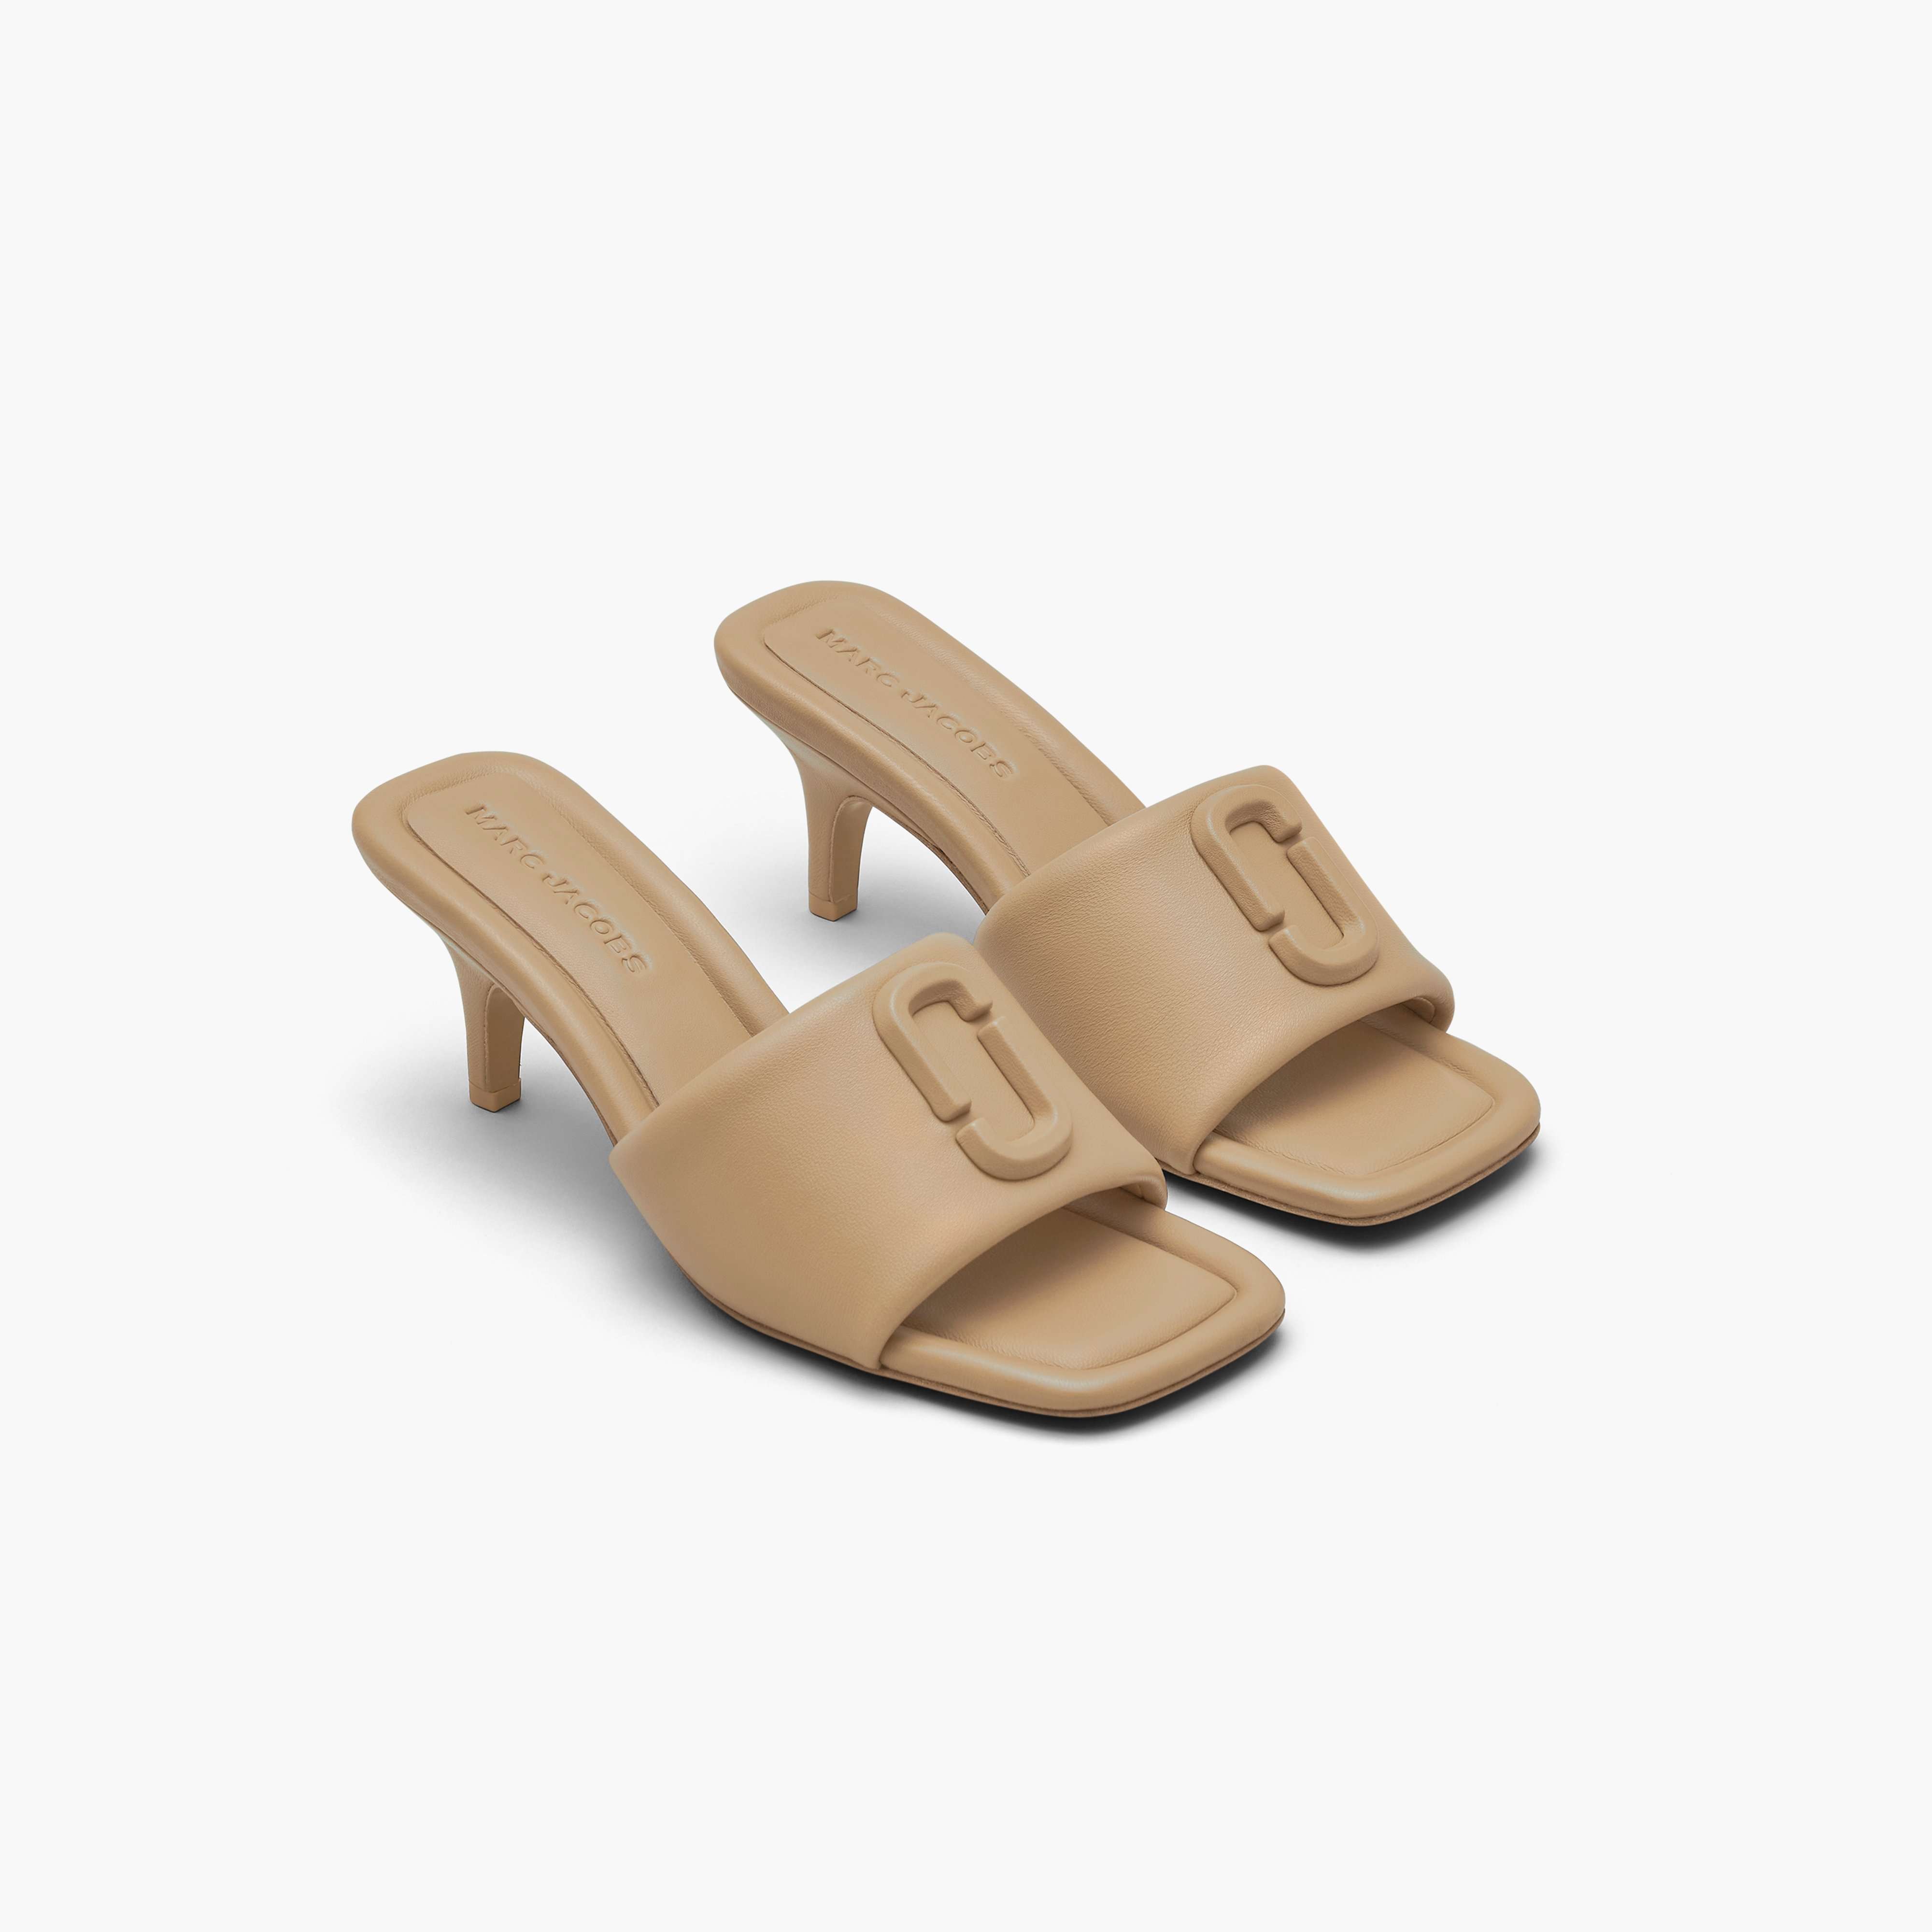 The Leather J Marc Heeled Sandal in Camel